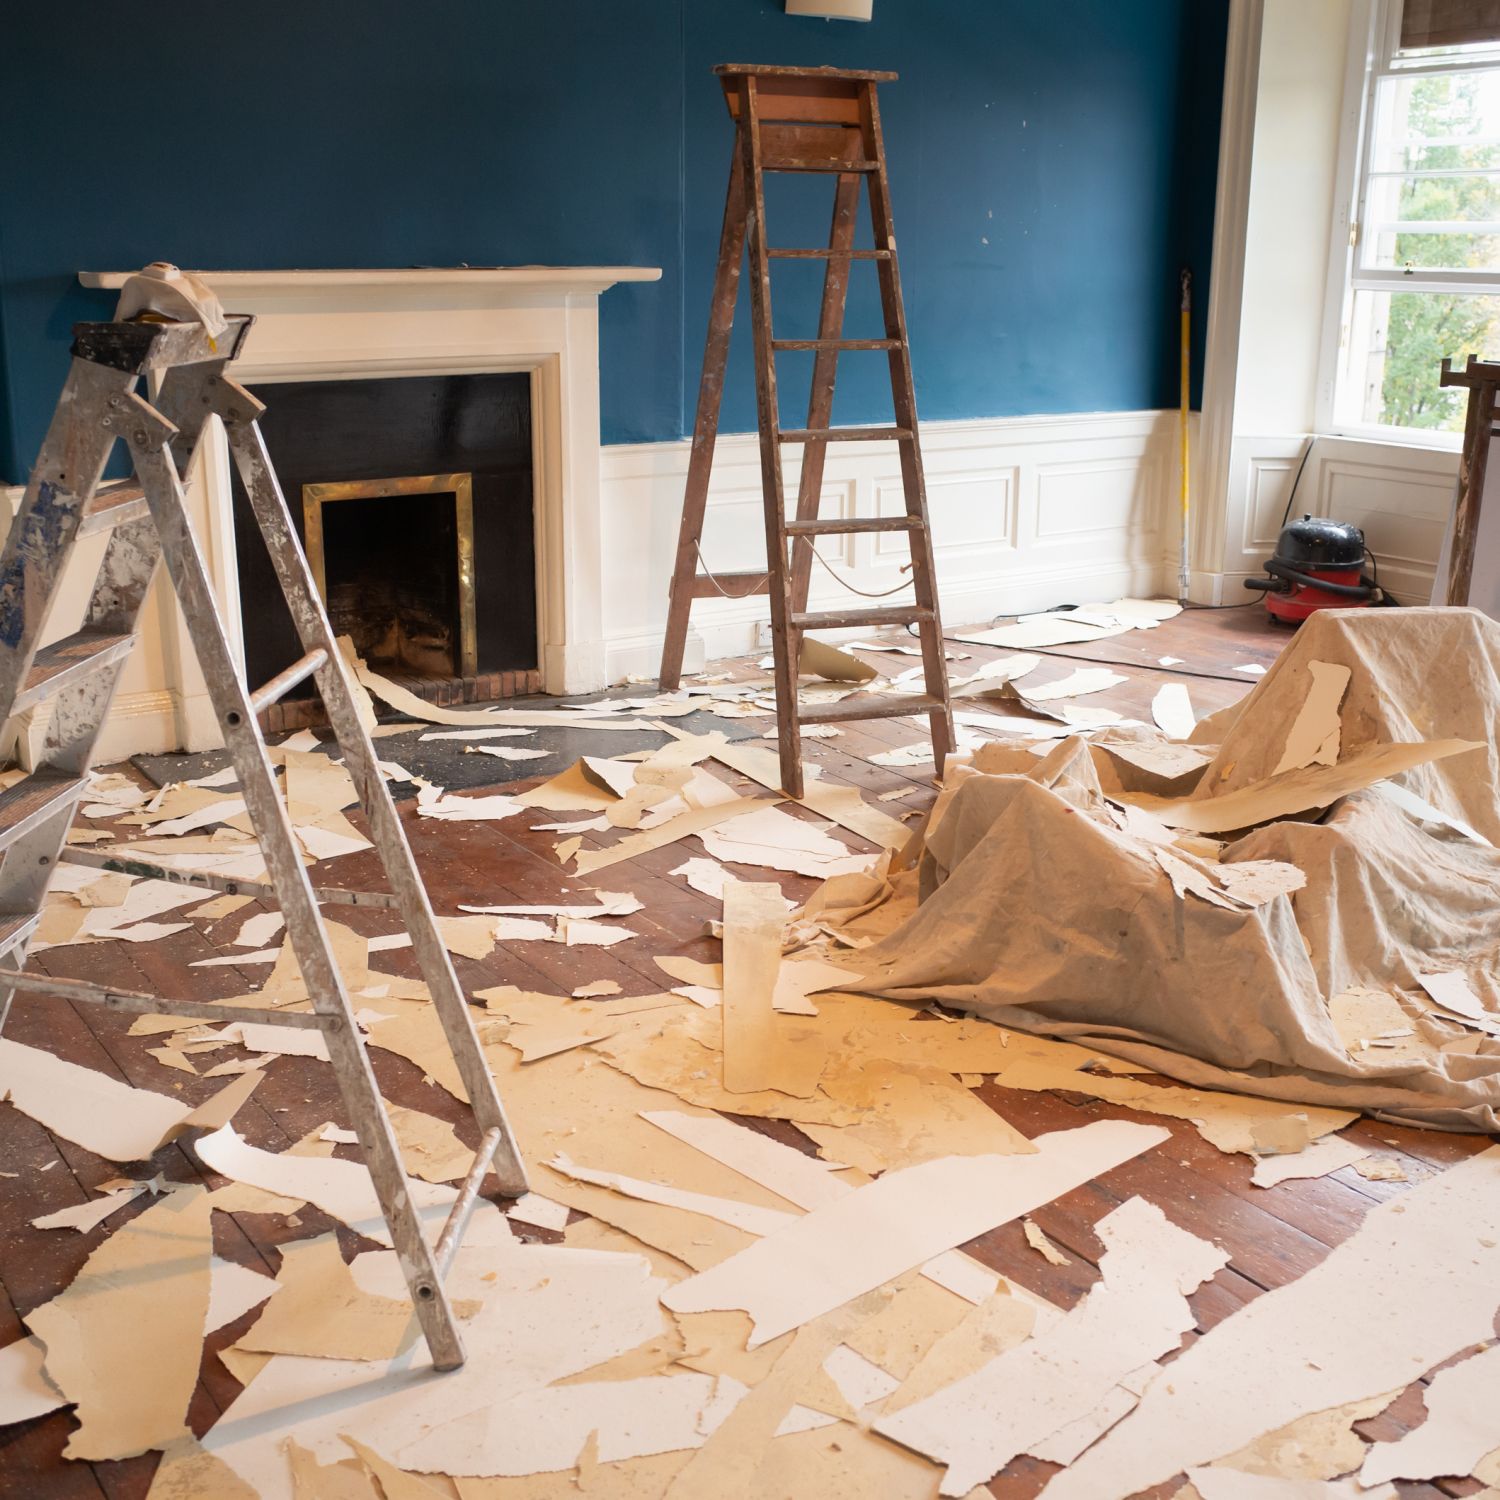 A room in the midst of a renovation, the floor is covered with wallpaper stripped from the walls and ceiling.